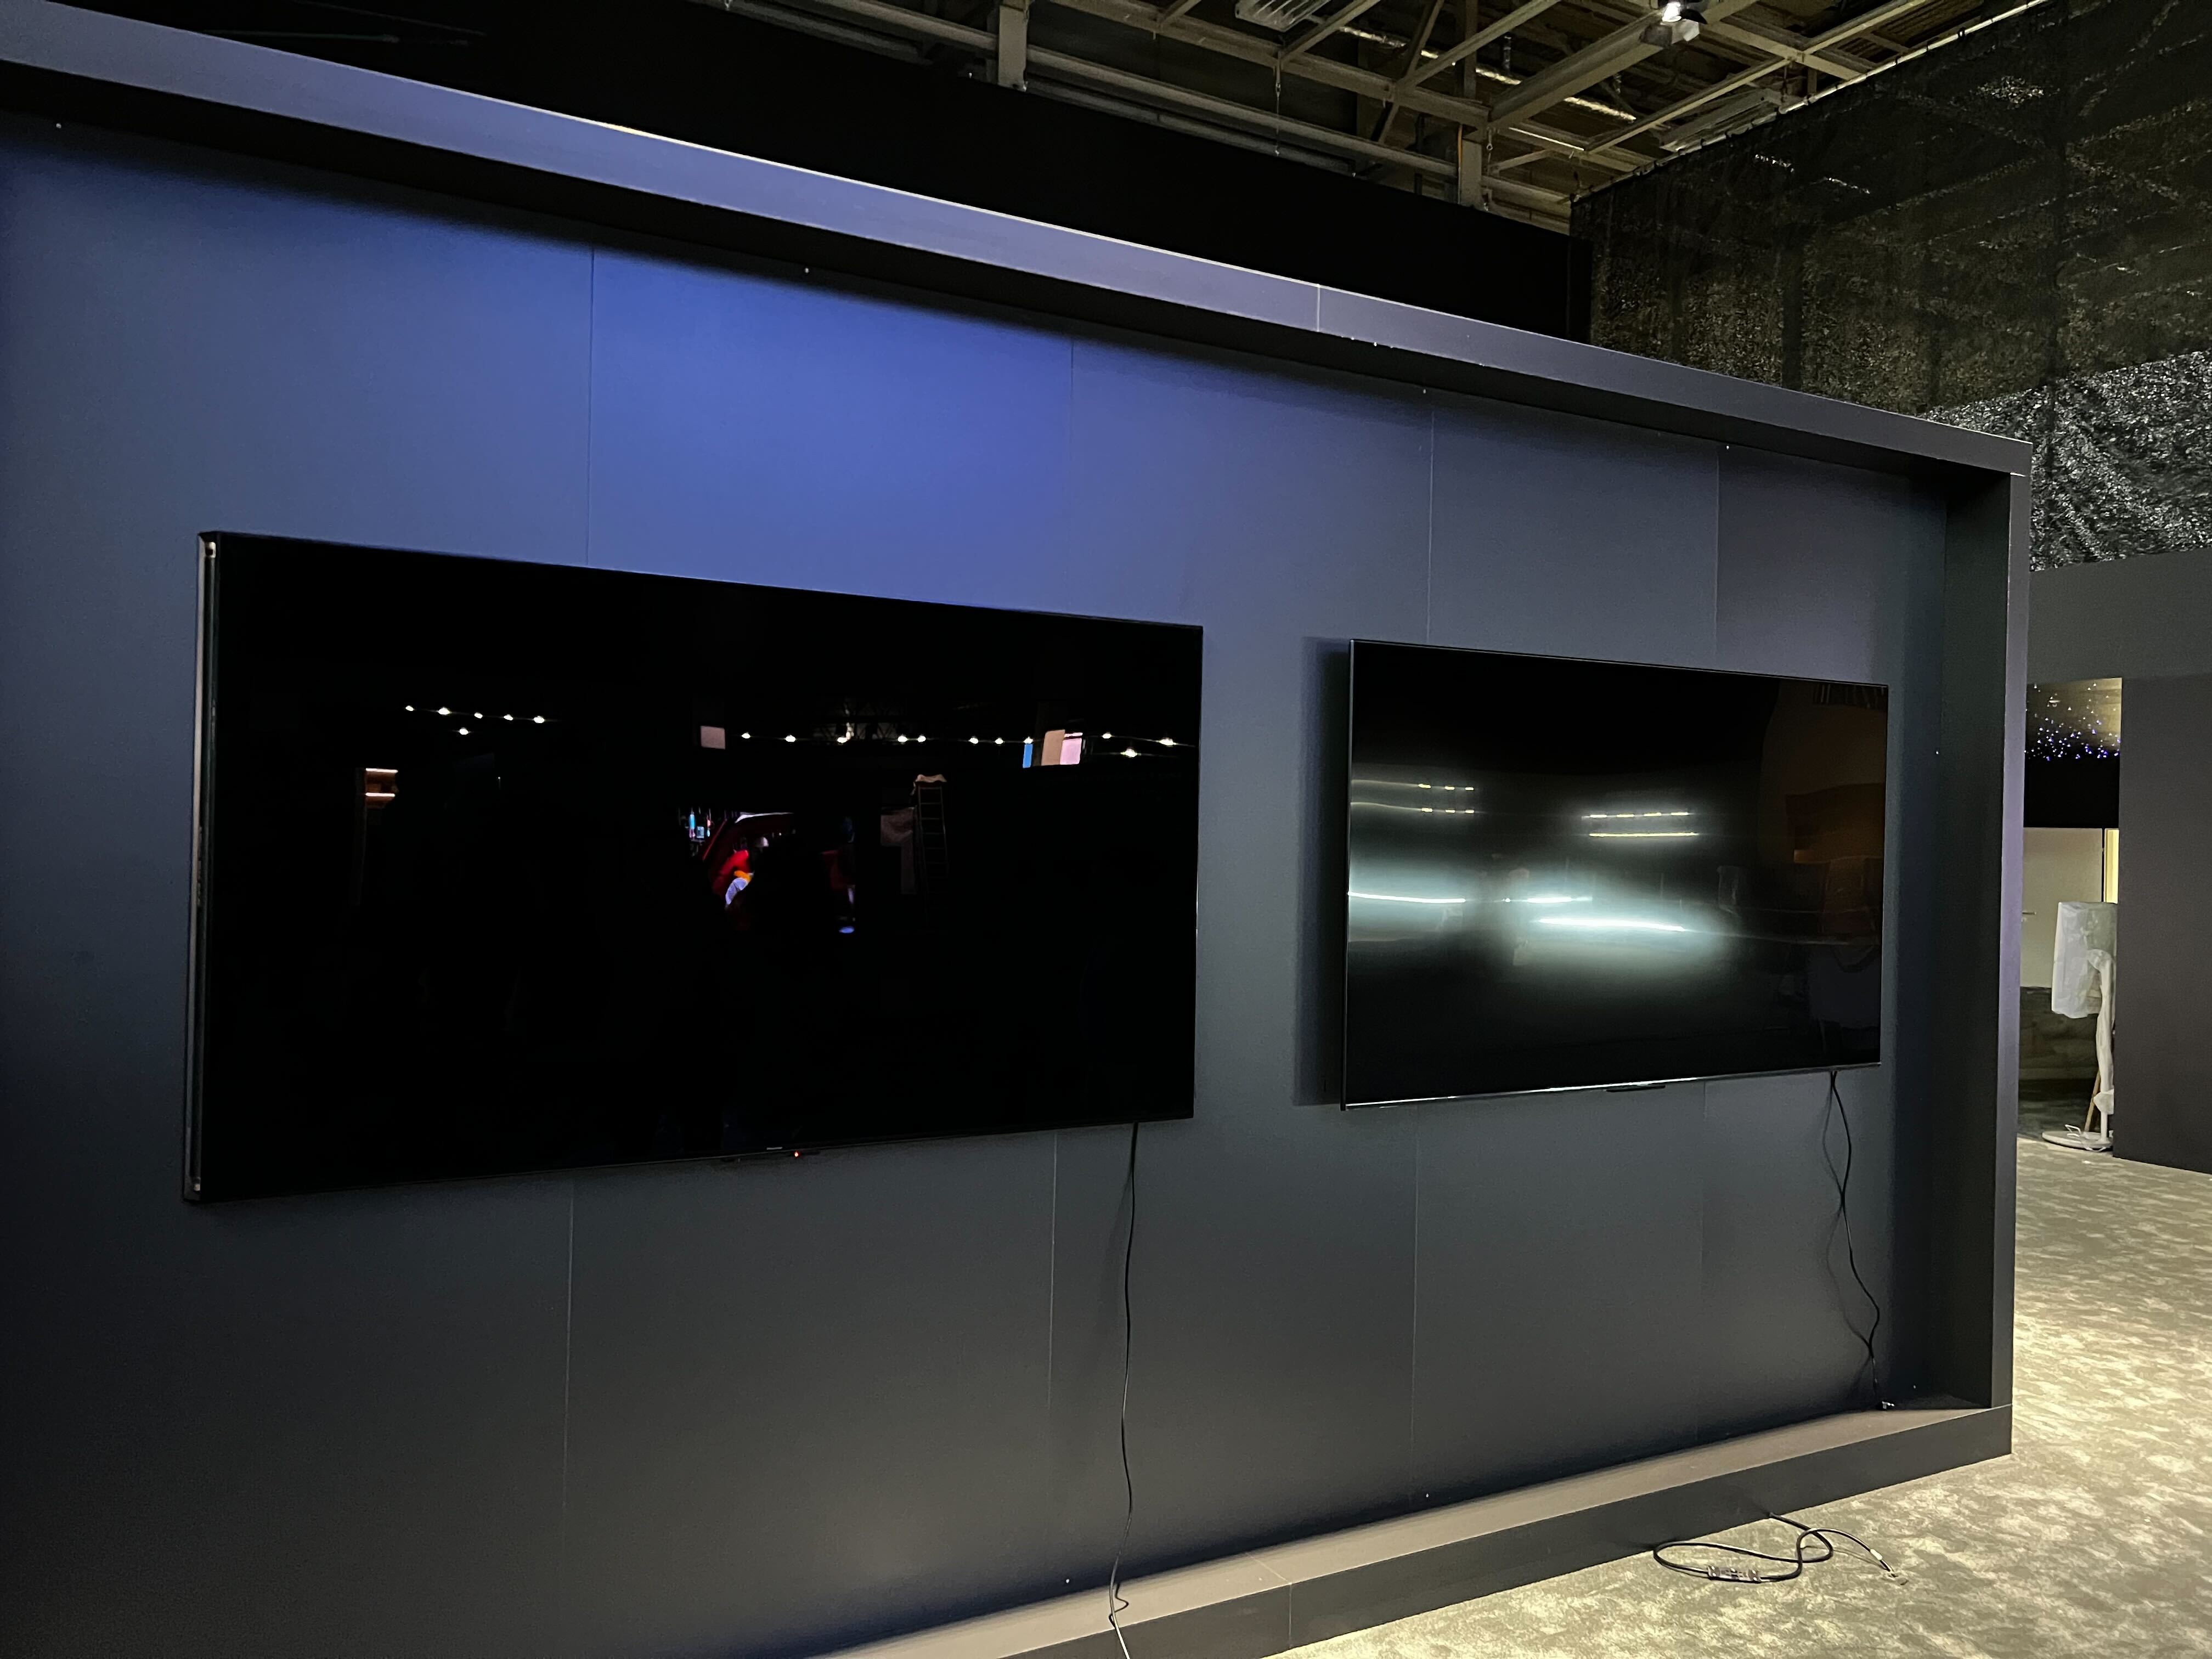 Two TVs on a wall, with one showing new anti-reflective tech